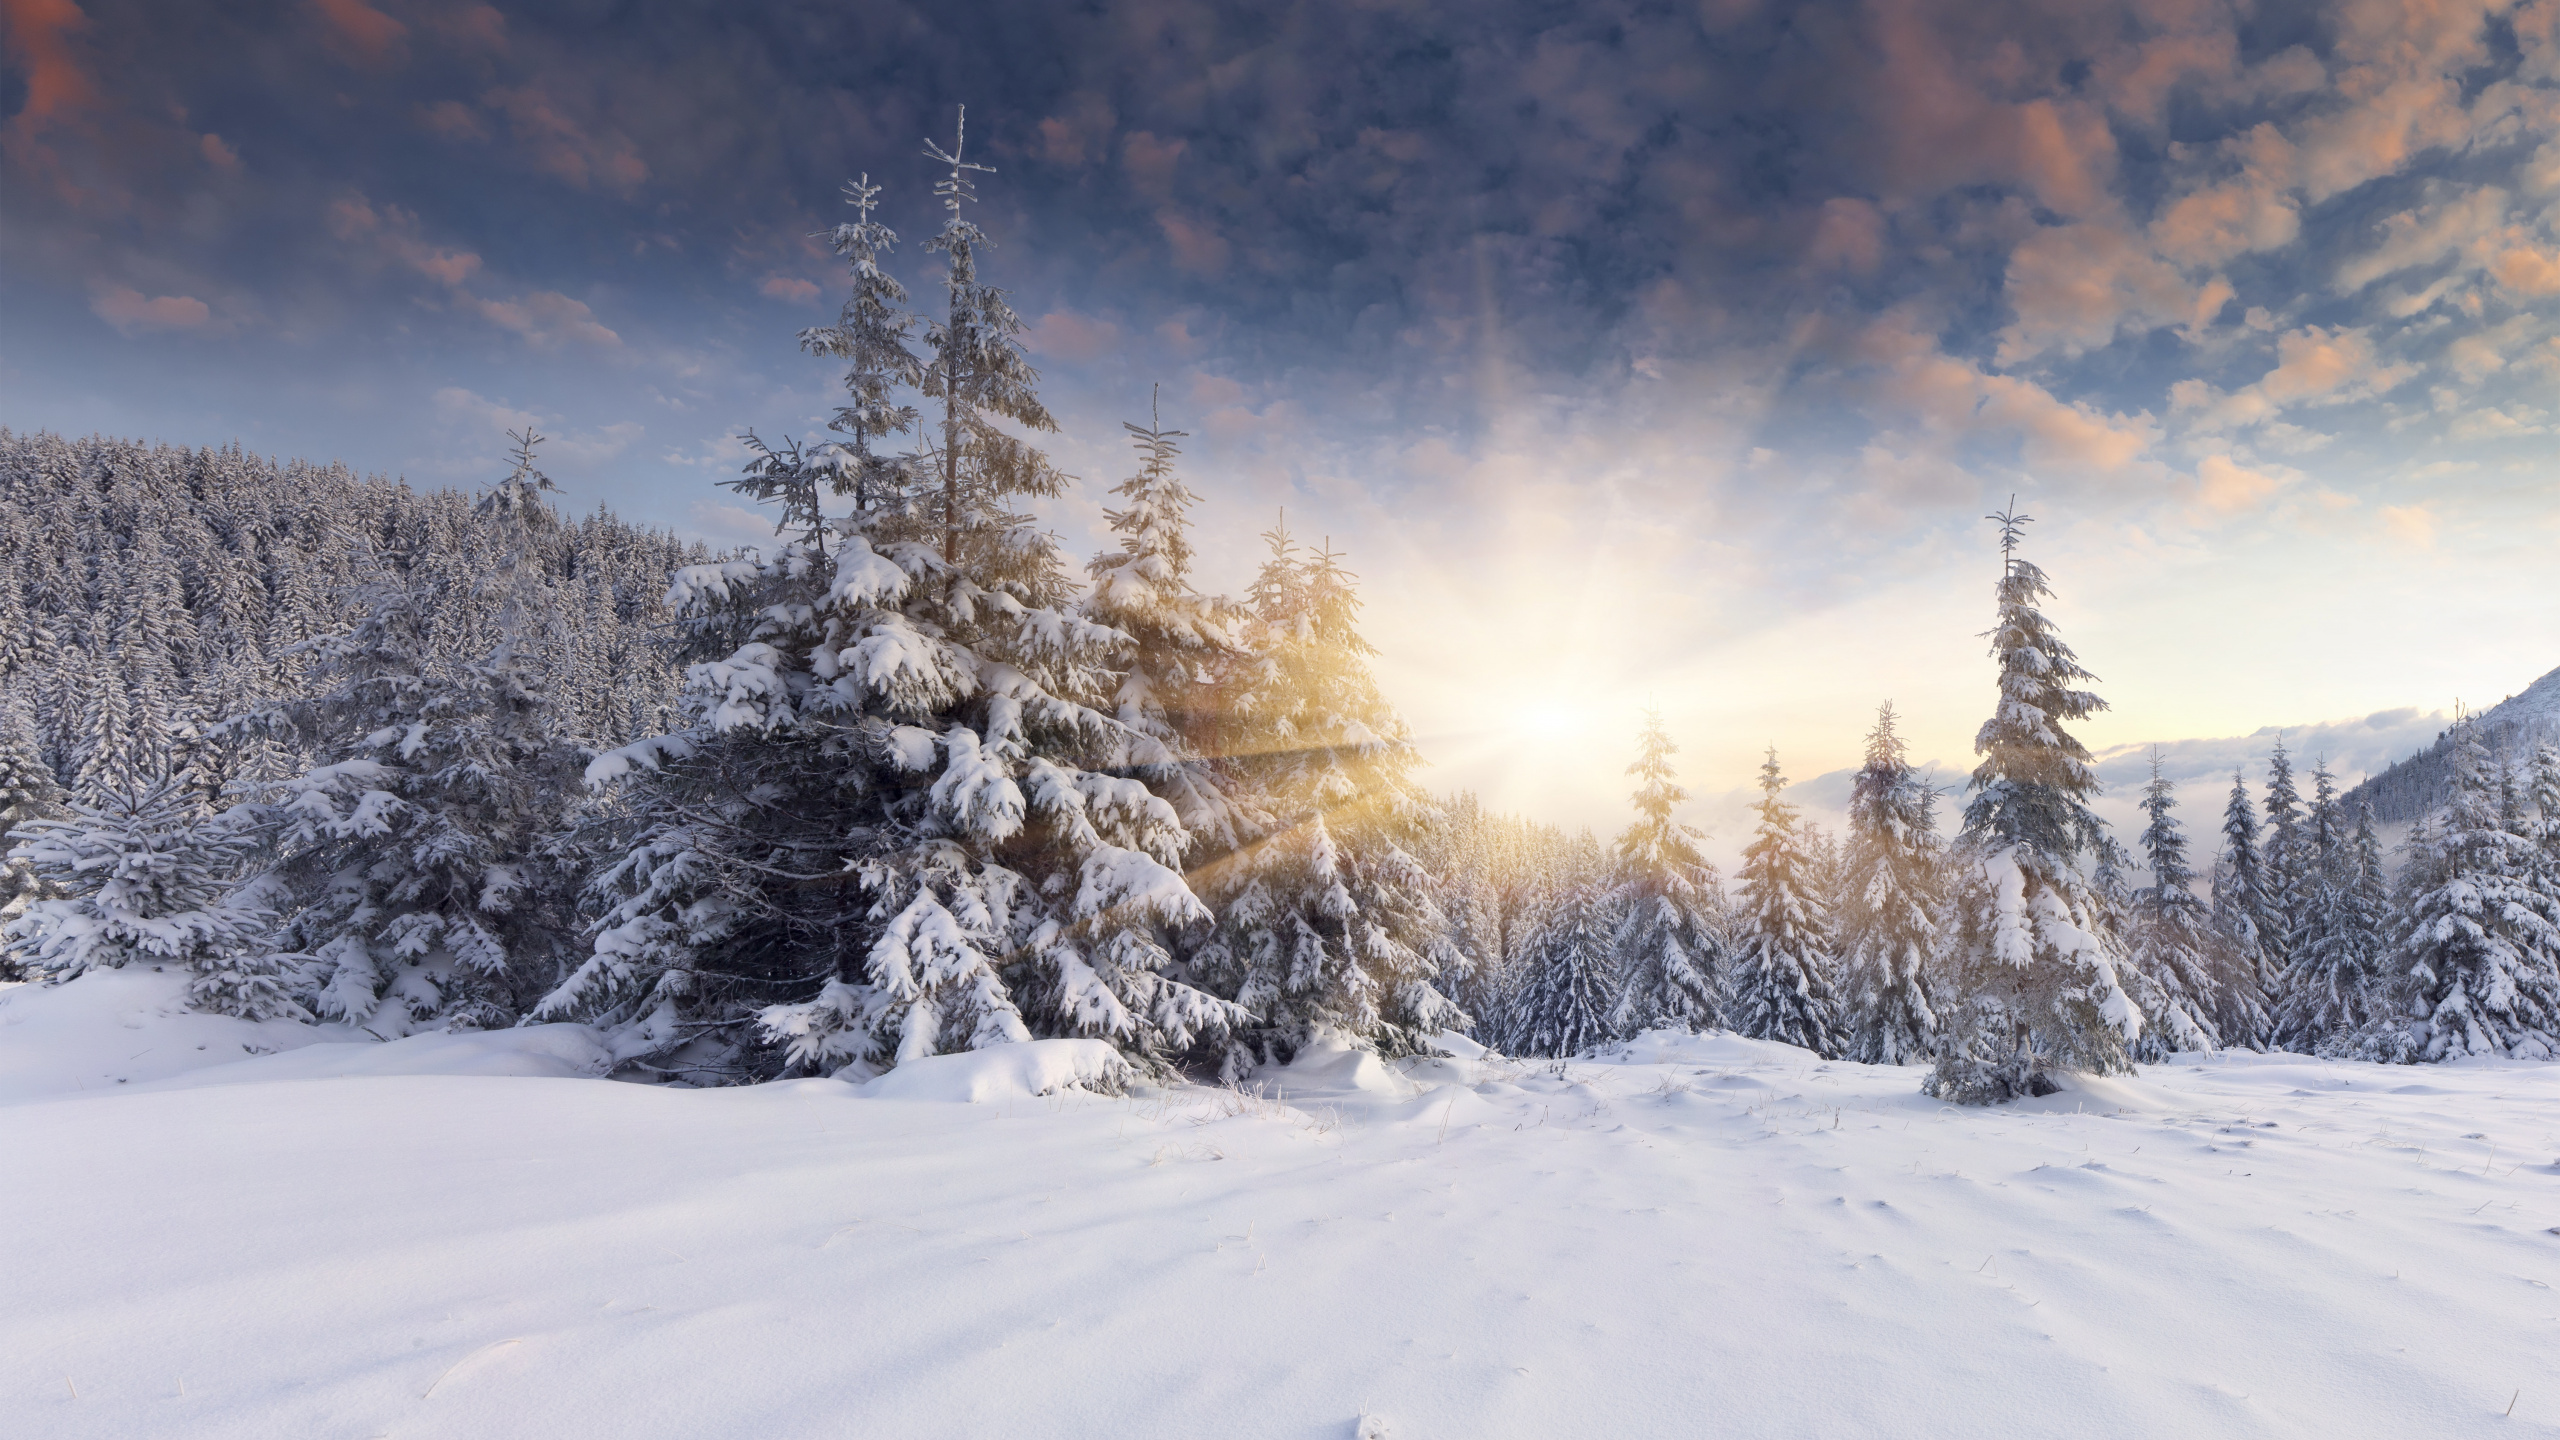 Snow Covered Trees During Daytime. Wallpaper in 2560x1440 Resolution